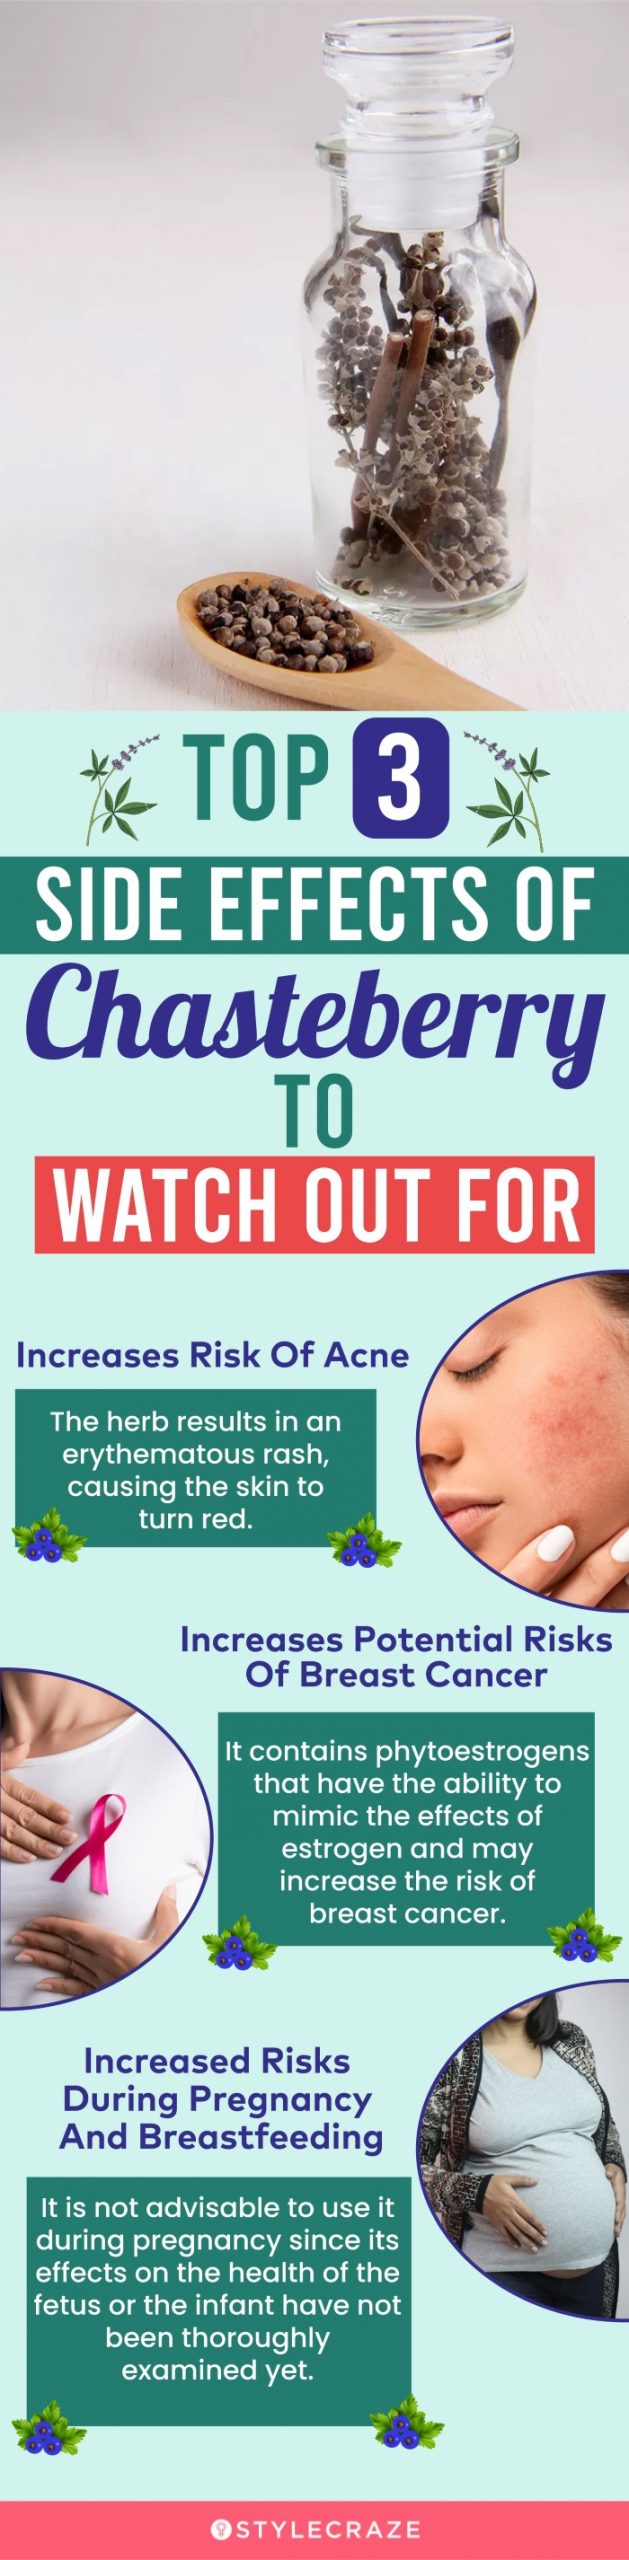 top 3 side effects of chasteberry to watch out for (infographic)